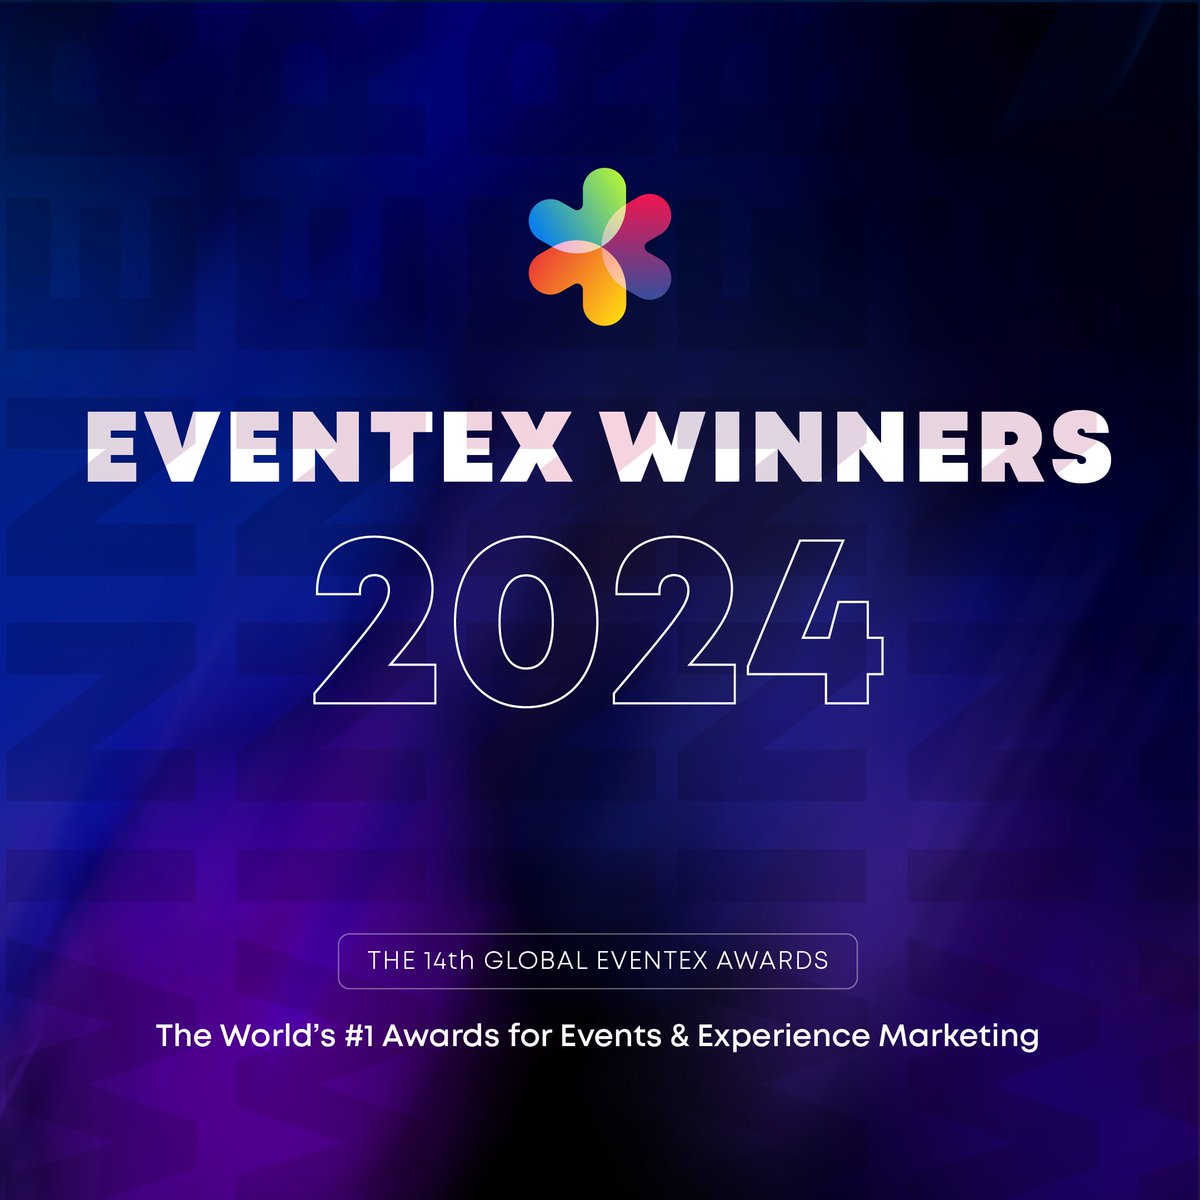 🌟 The moment we have all been waiting for has finally come! 🌟 🏆 Here are the winners of Eventex Awards 2024! Let’s give them a round of applause and celebrate their excellence, hard work, and creativity 👏🎉 🤩 You can see the winners here: hubs.la/Q02wlBvQ0